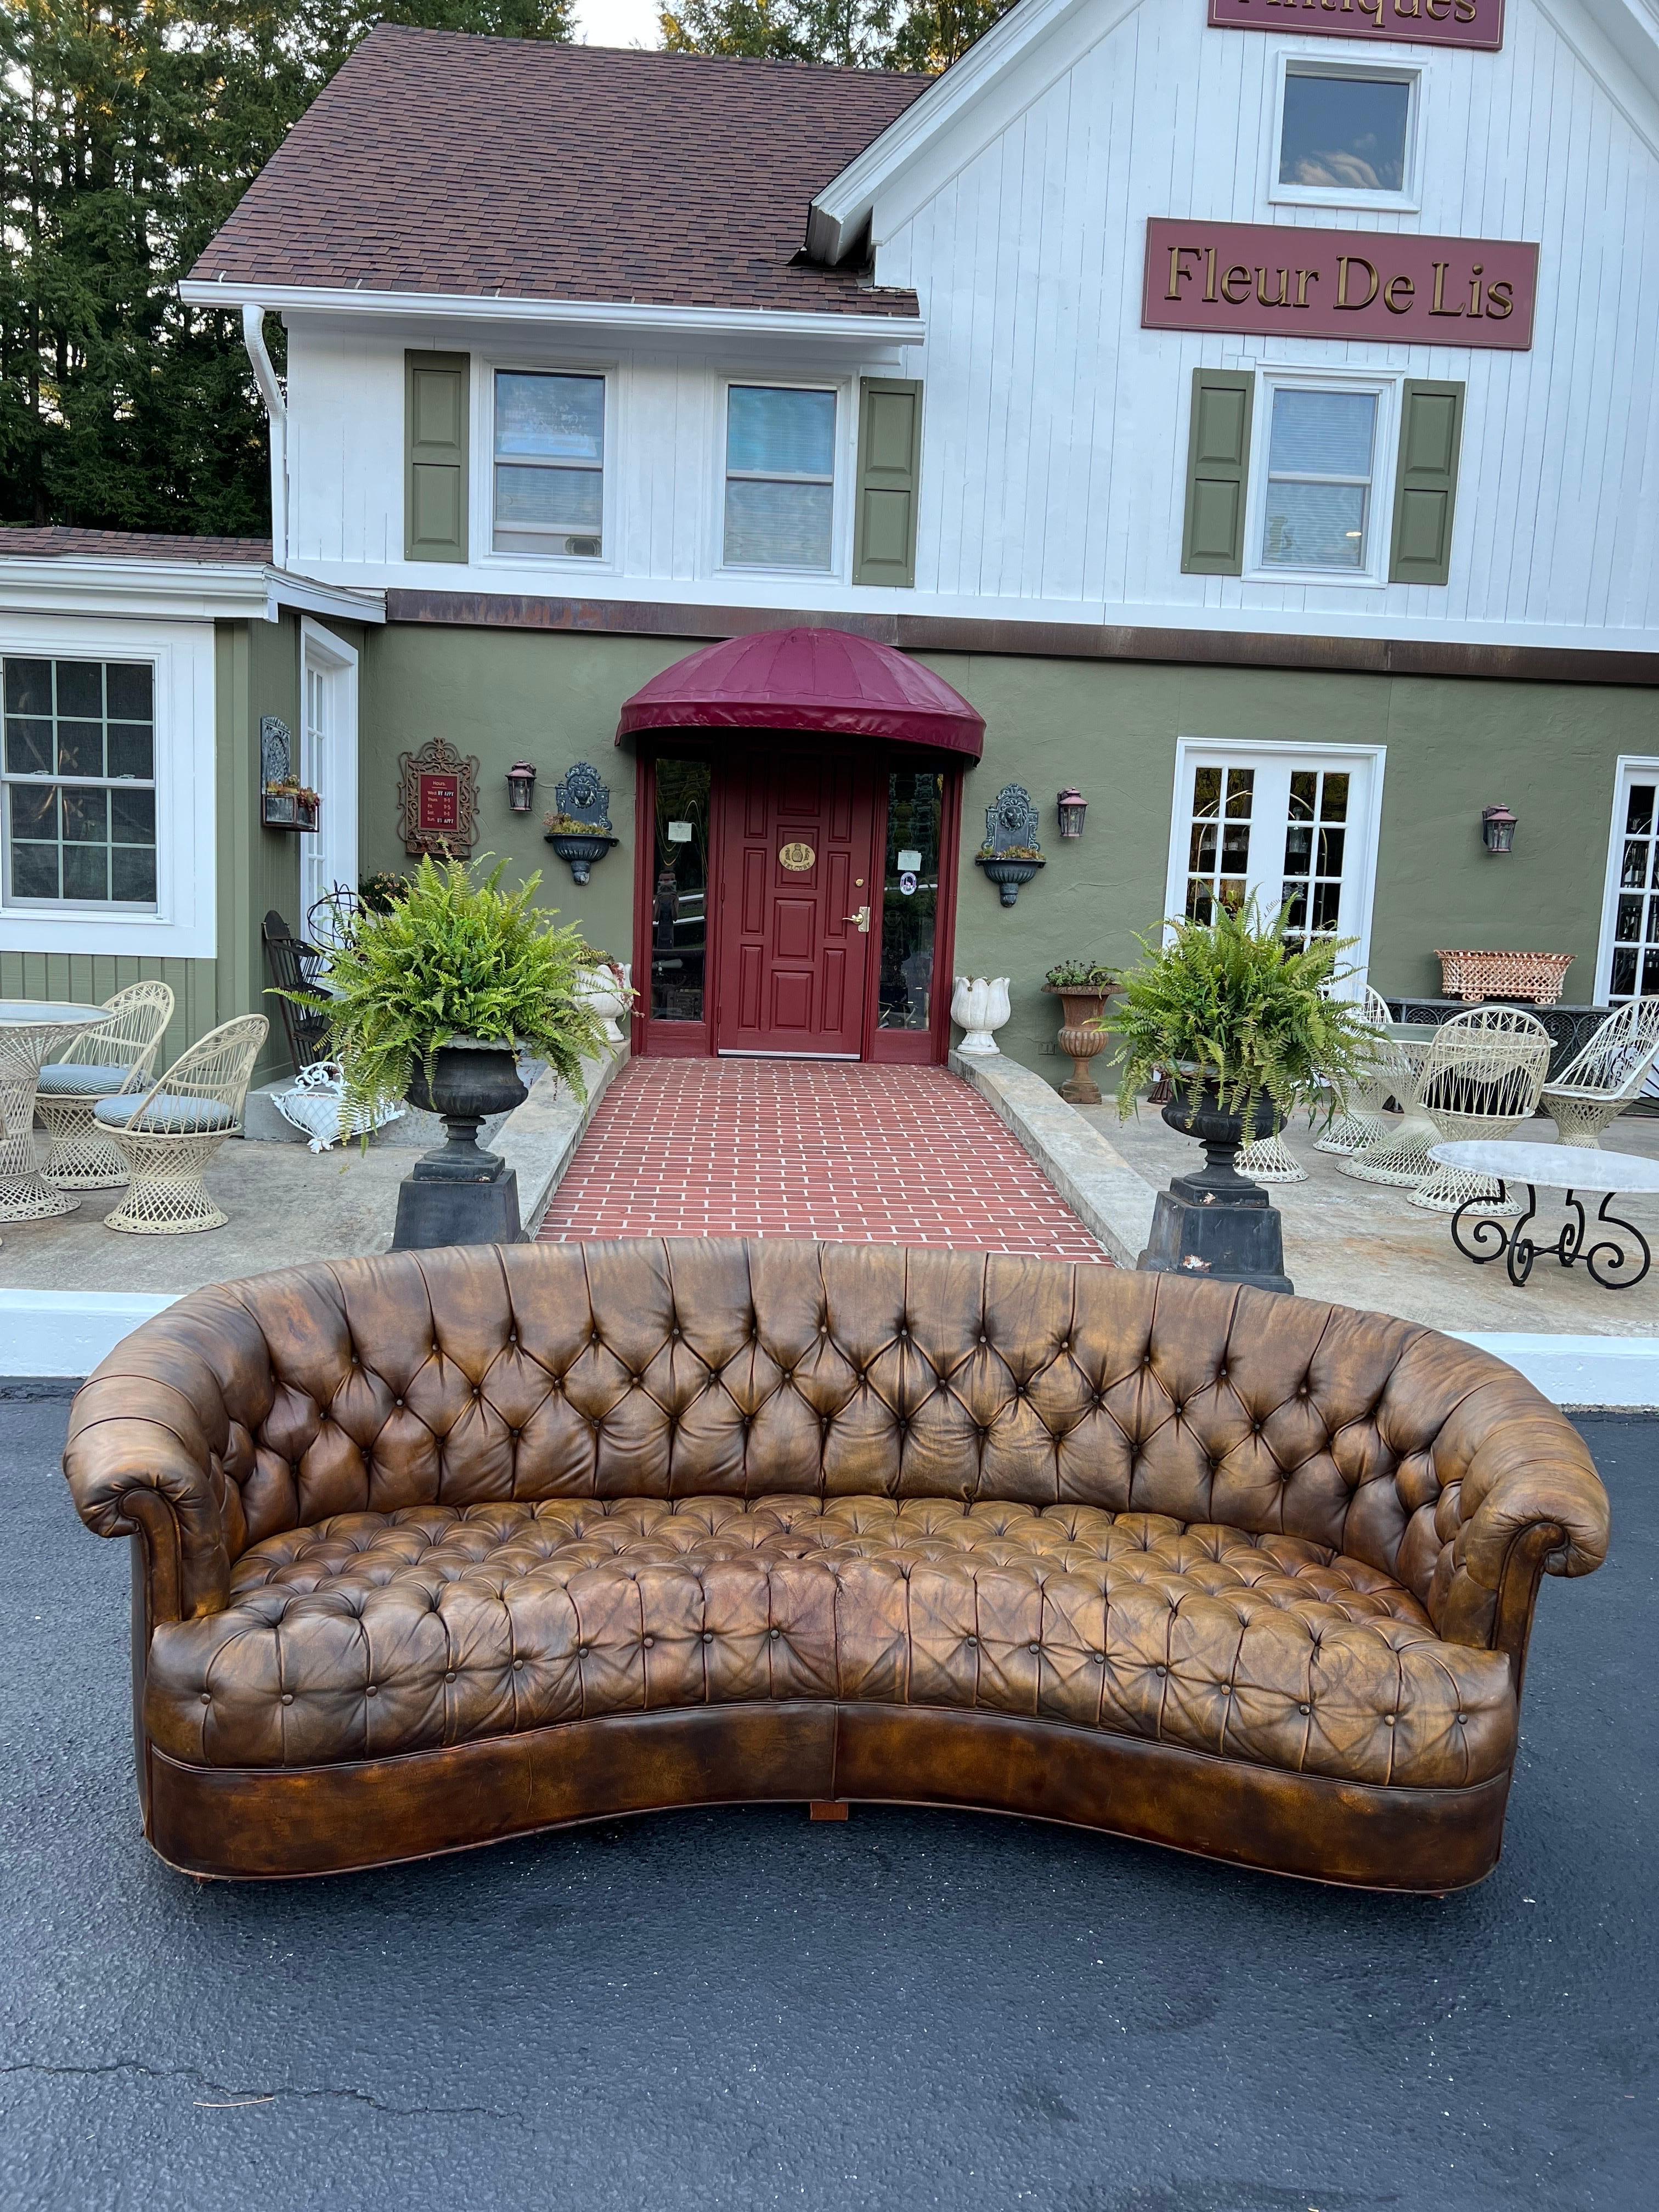 Curved brown leather Chesterfield sofa. The perfect amount of wear and patina on this classic beauty. Please inquire about our local or tri state delivery. We can also get you a UShip quote if a zip code is provided.